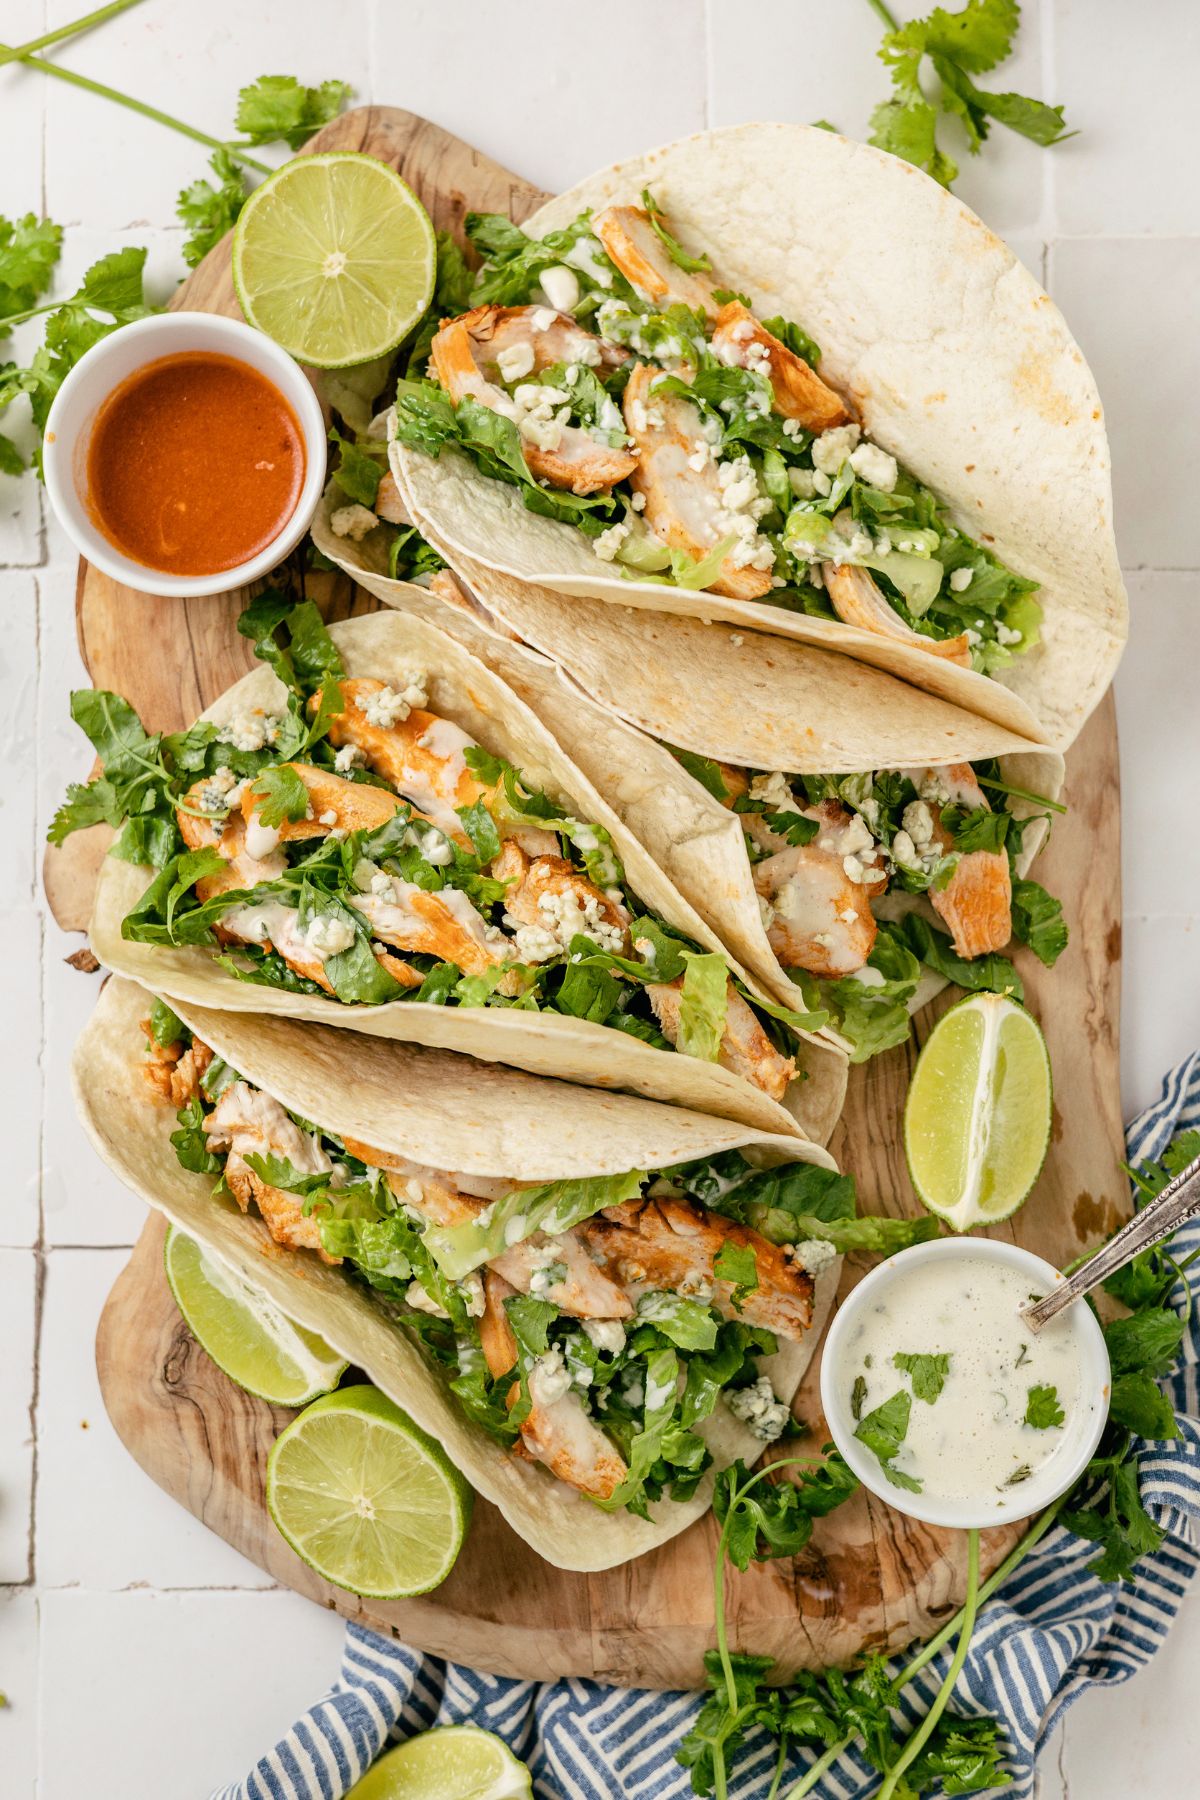 Buffalo Chicken Tacos served with zesty dips and fresh lemon slices on the side.